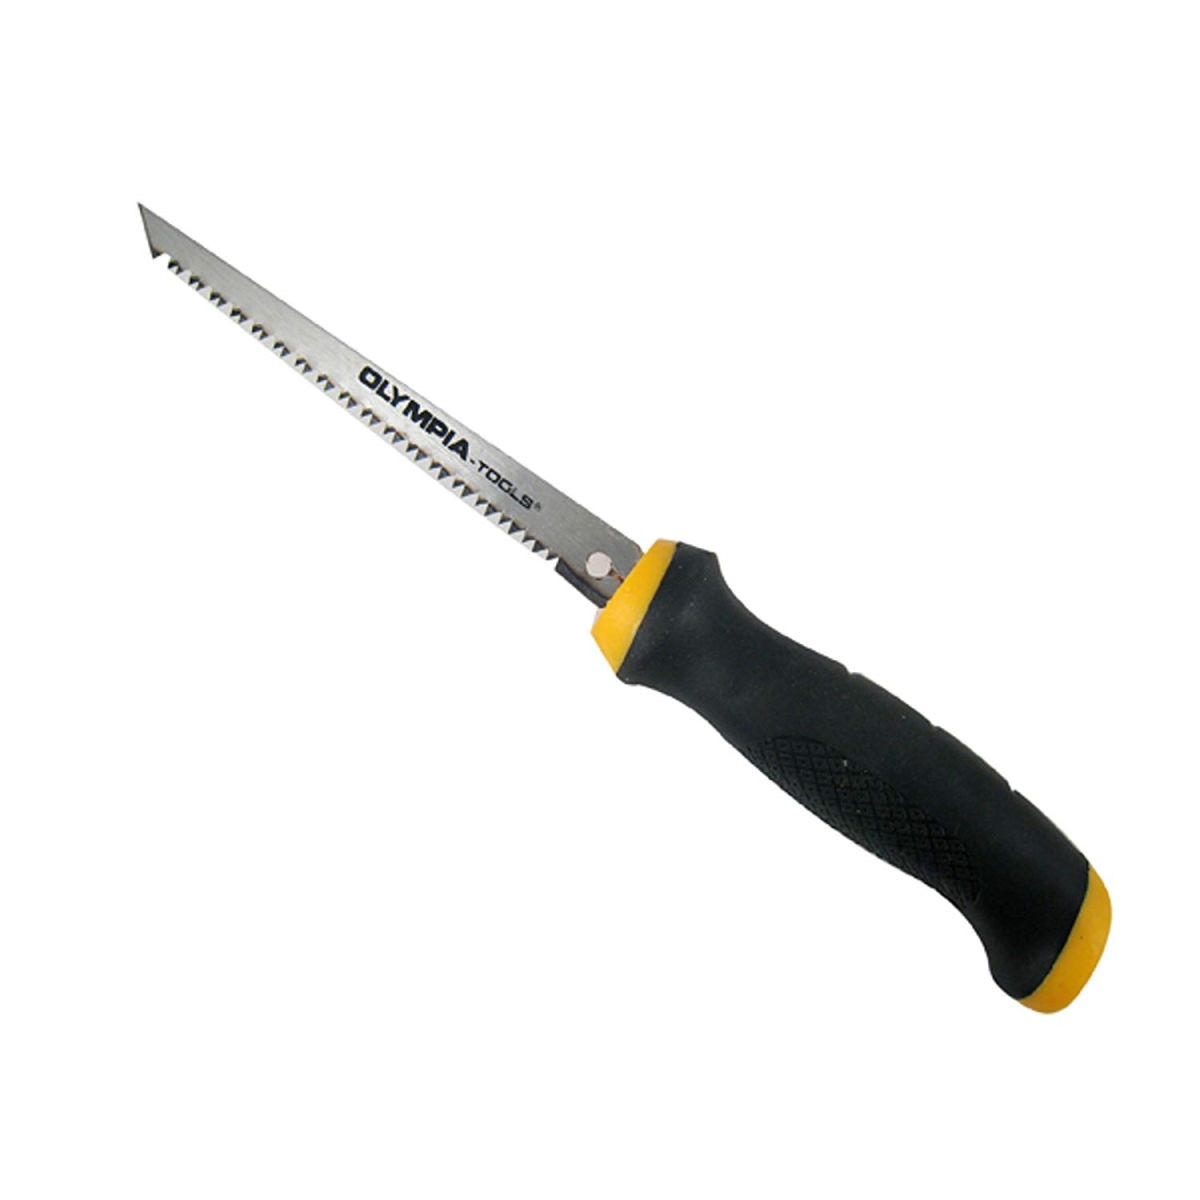 34-000 6 In. Jab Saw Set With Black & Yellow Handle